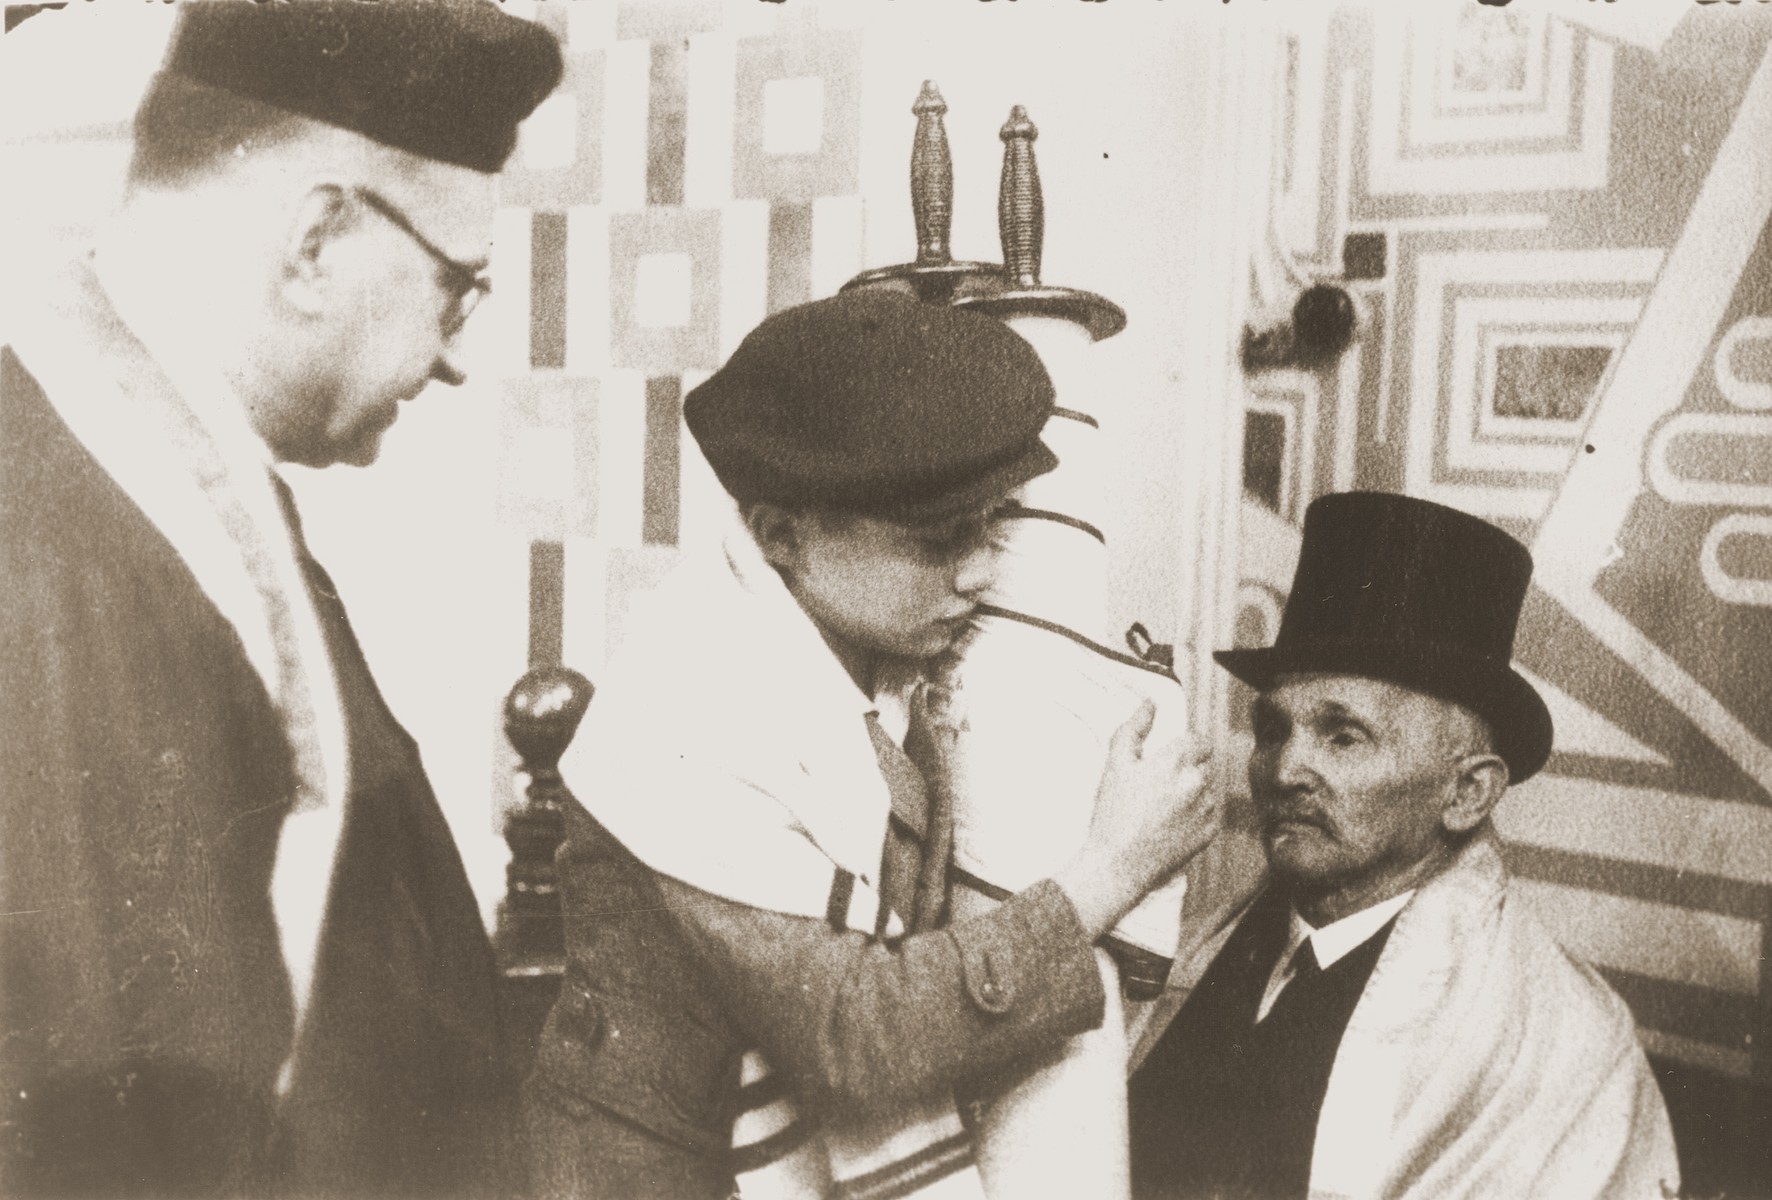 Siegbert Levy hands the Torah scroll to his great uncle (right) during his bar mitzvah at the liberal Zerrennerstrasse synagogue in Pforzheim.